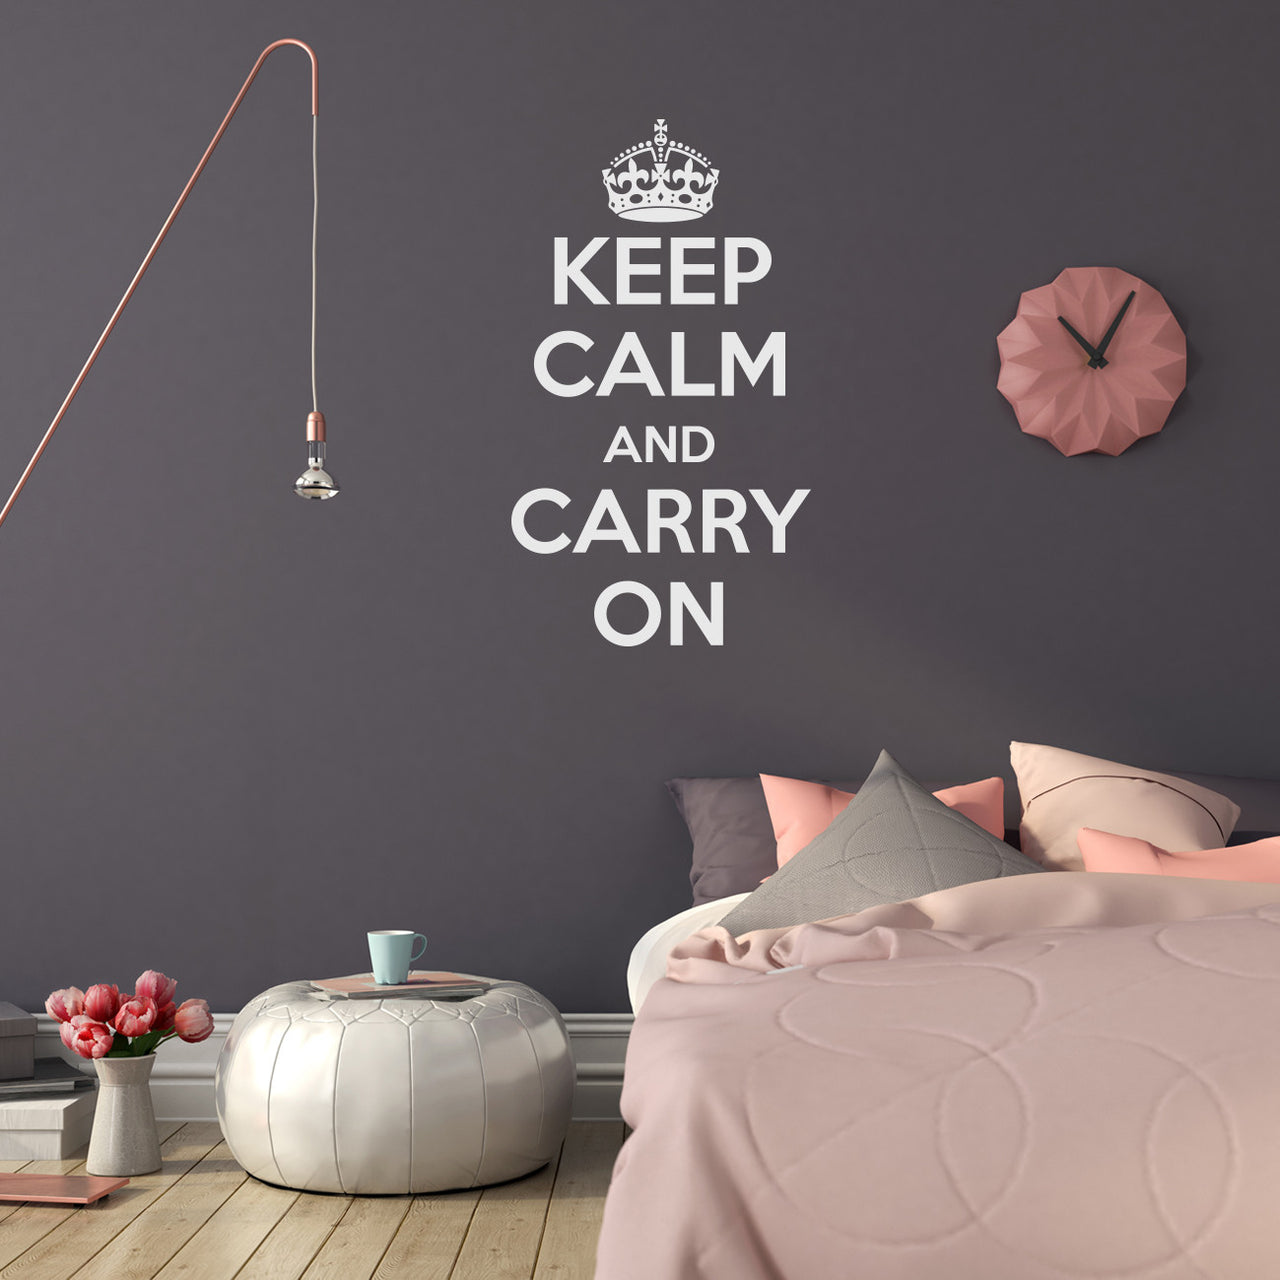 Keep Calm and Carry On Wall Decal